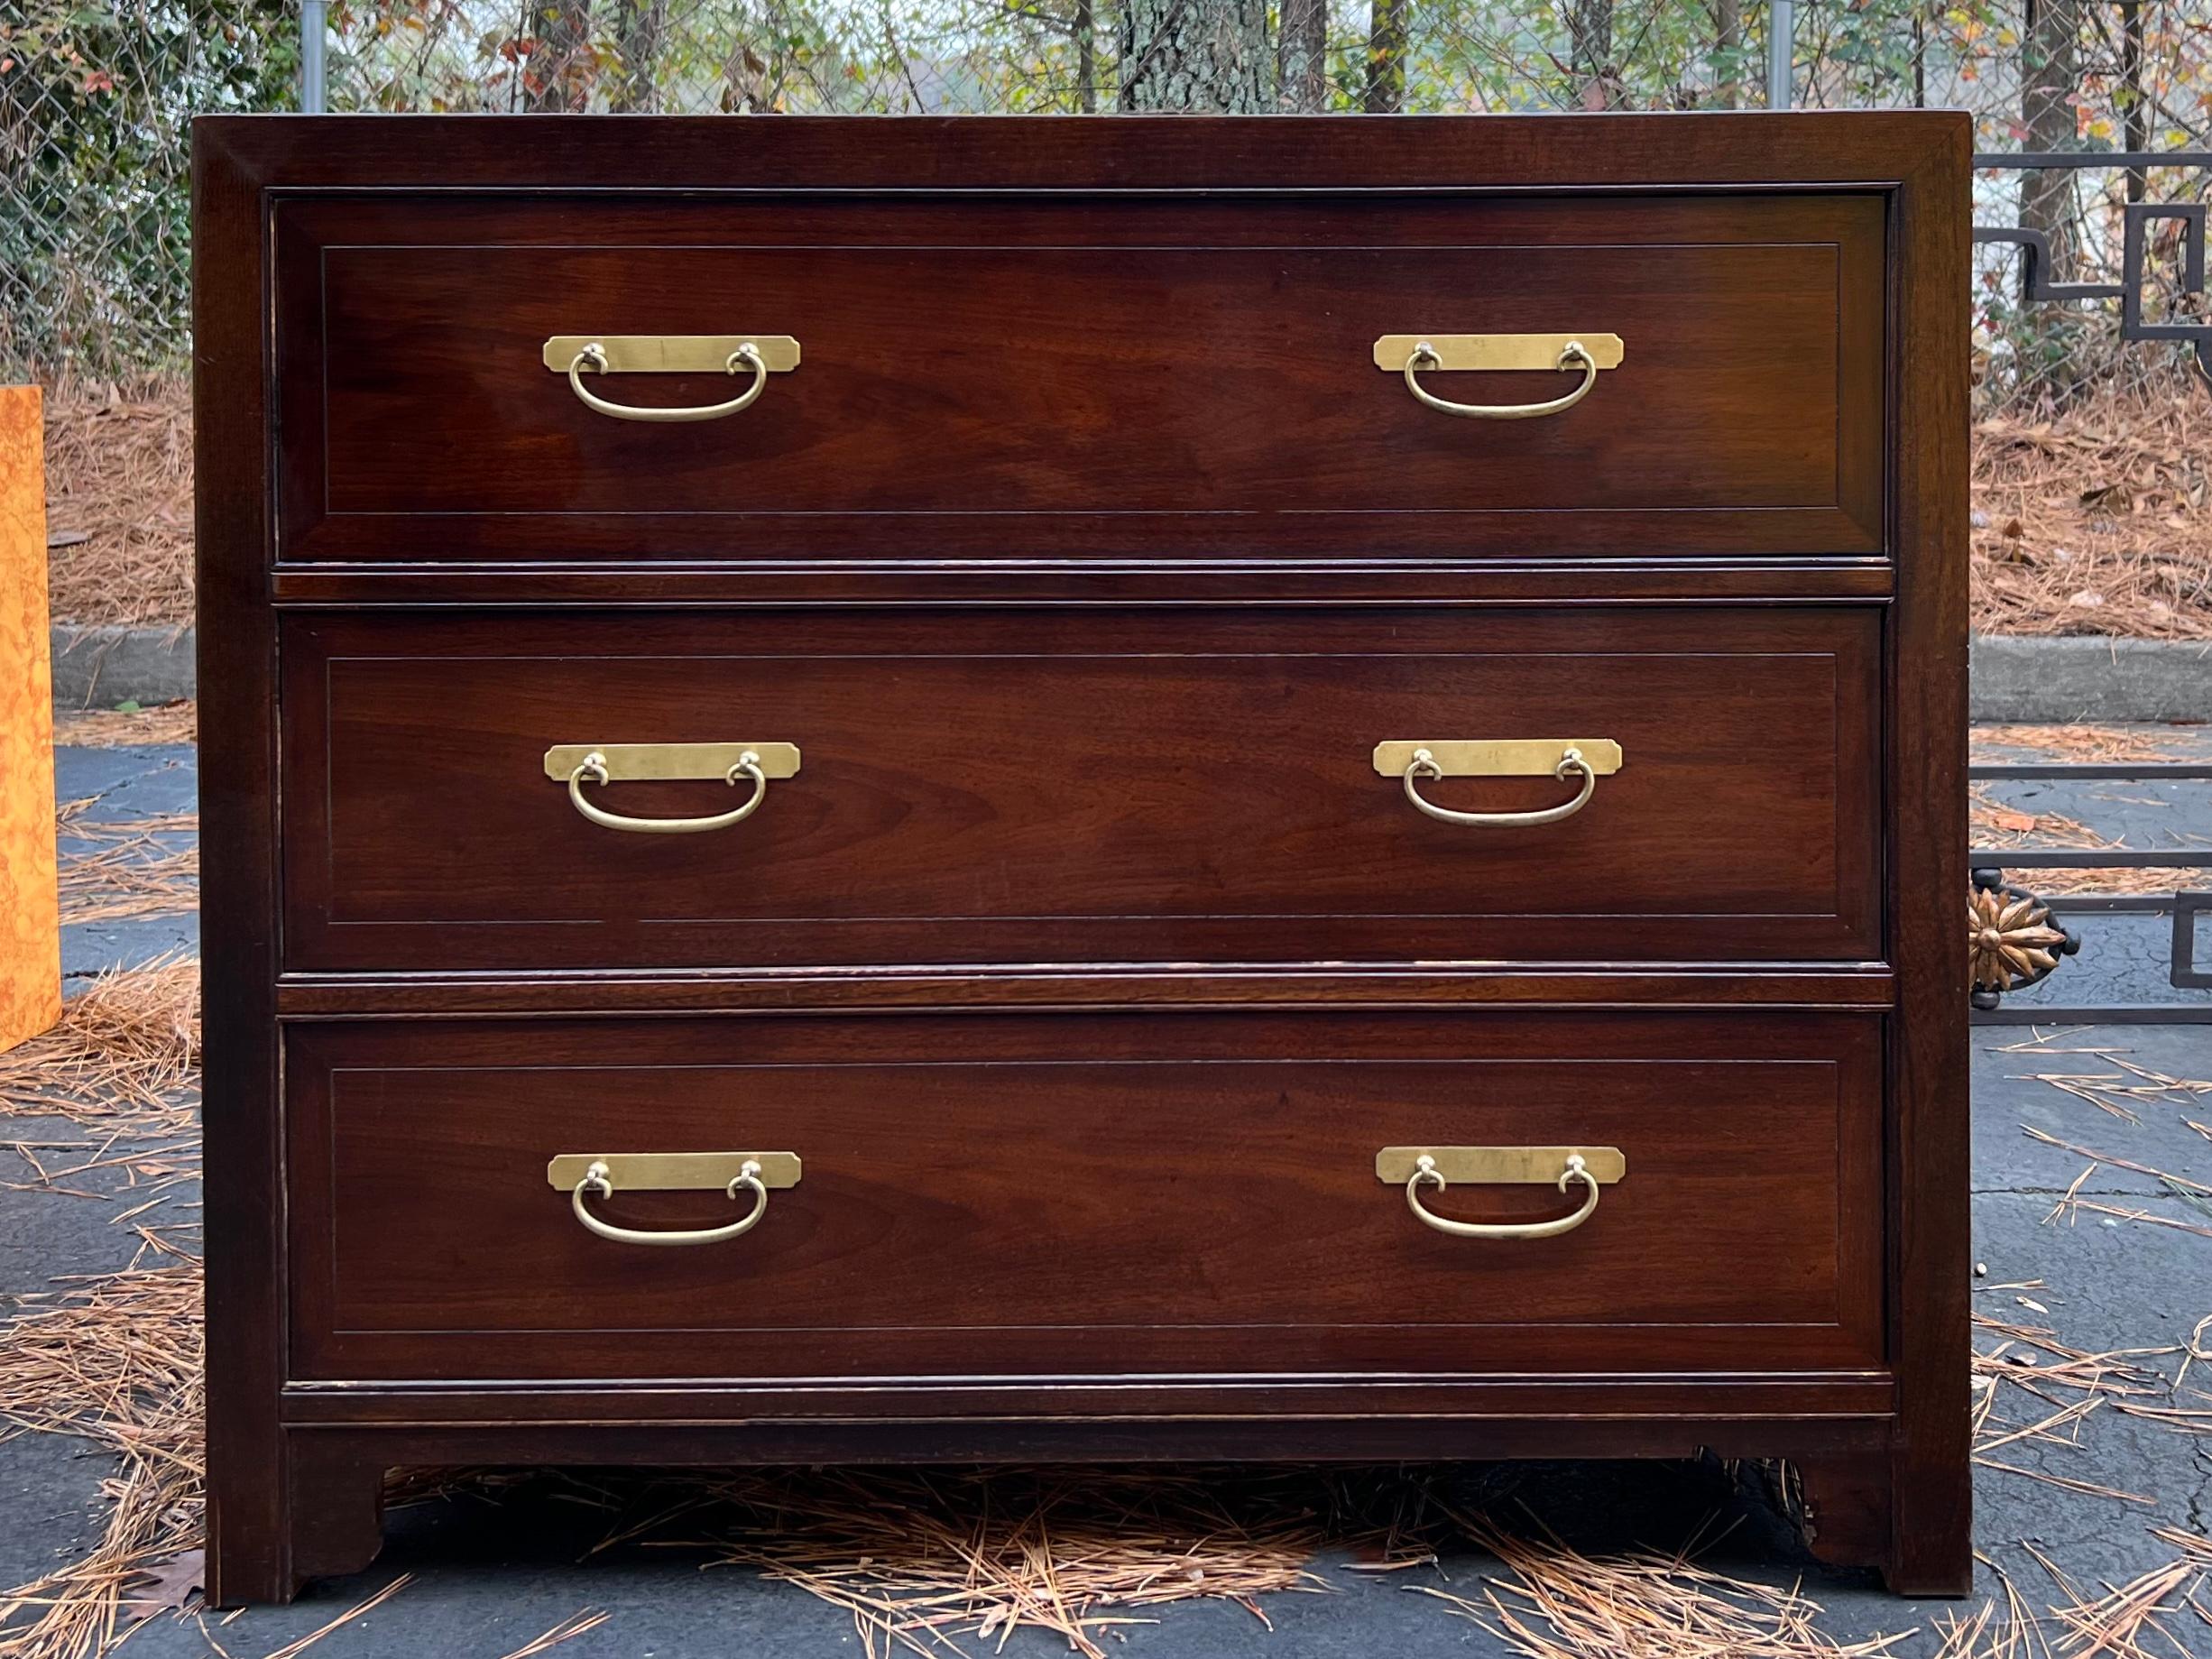 Baker Furniture always represents the best of American manufacturing! This is a pair of carved mahogany bachelor’s chests with Ming styling. They are in very good condition. The hardware is original, and they have dovetail construction.